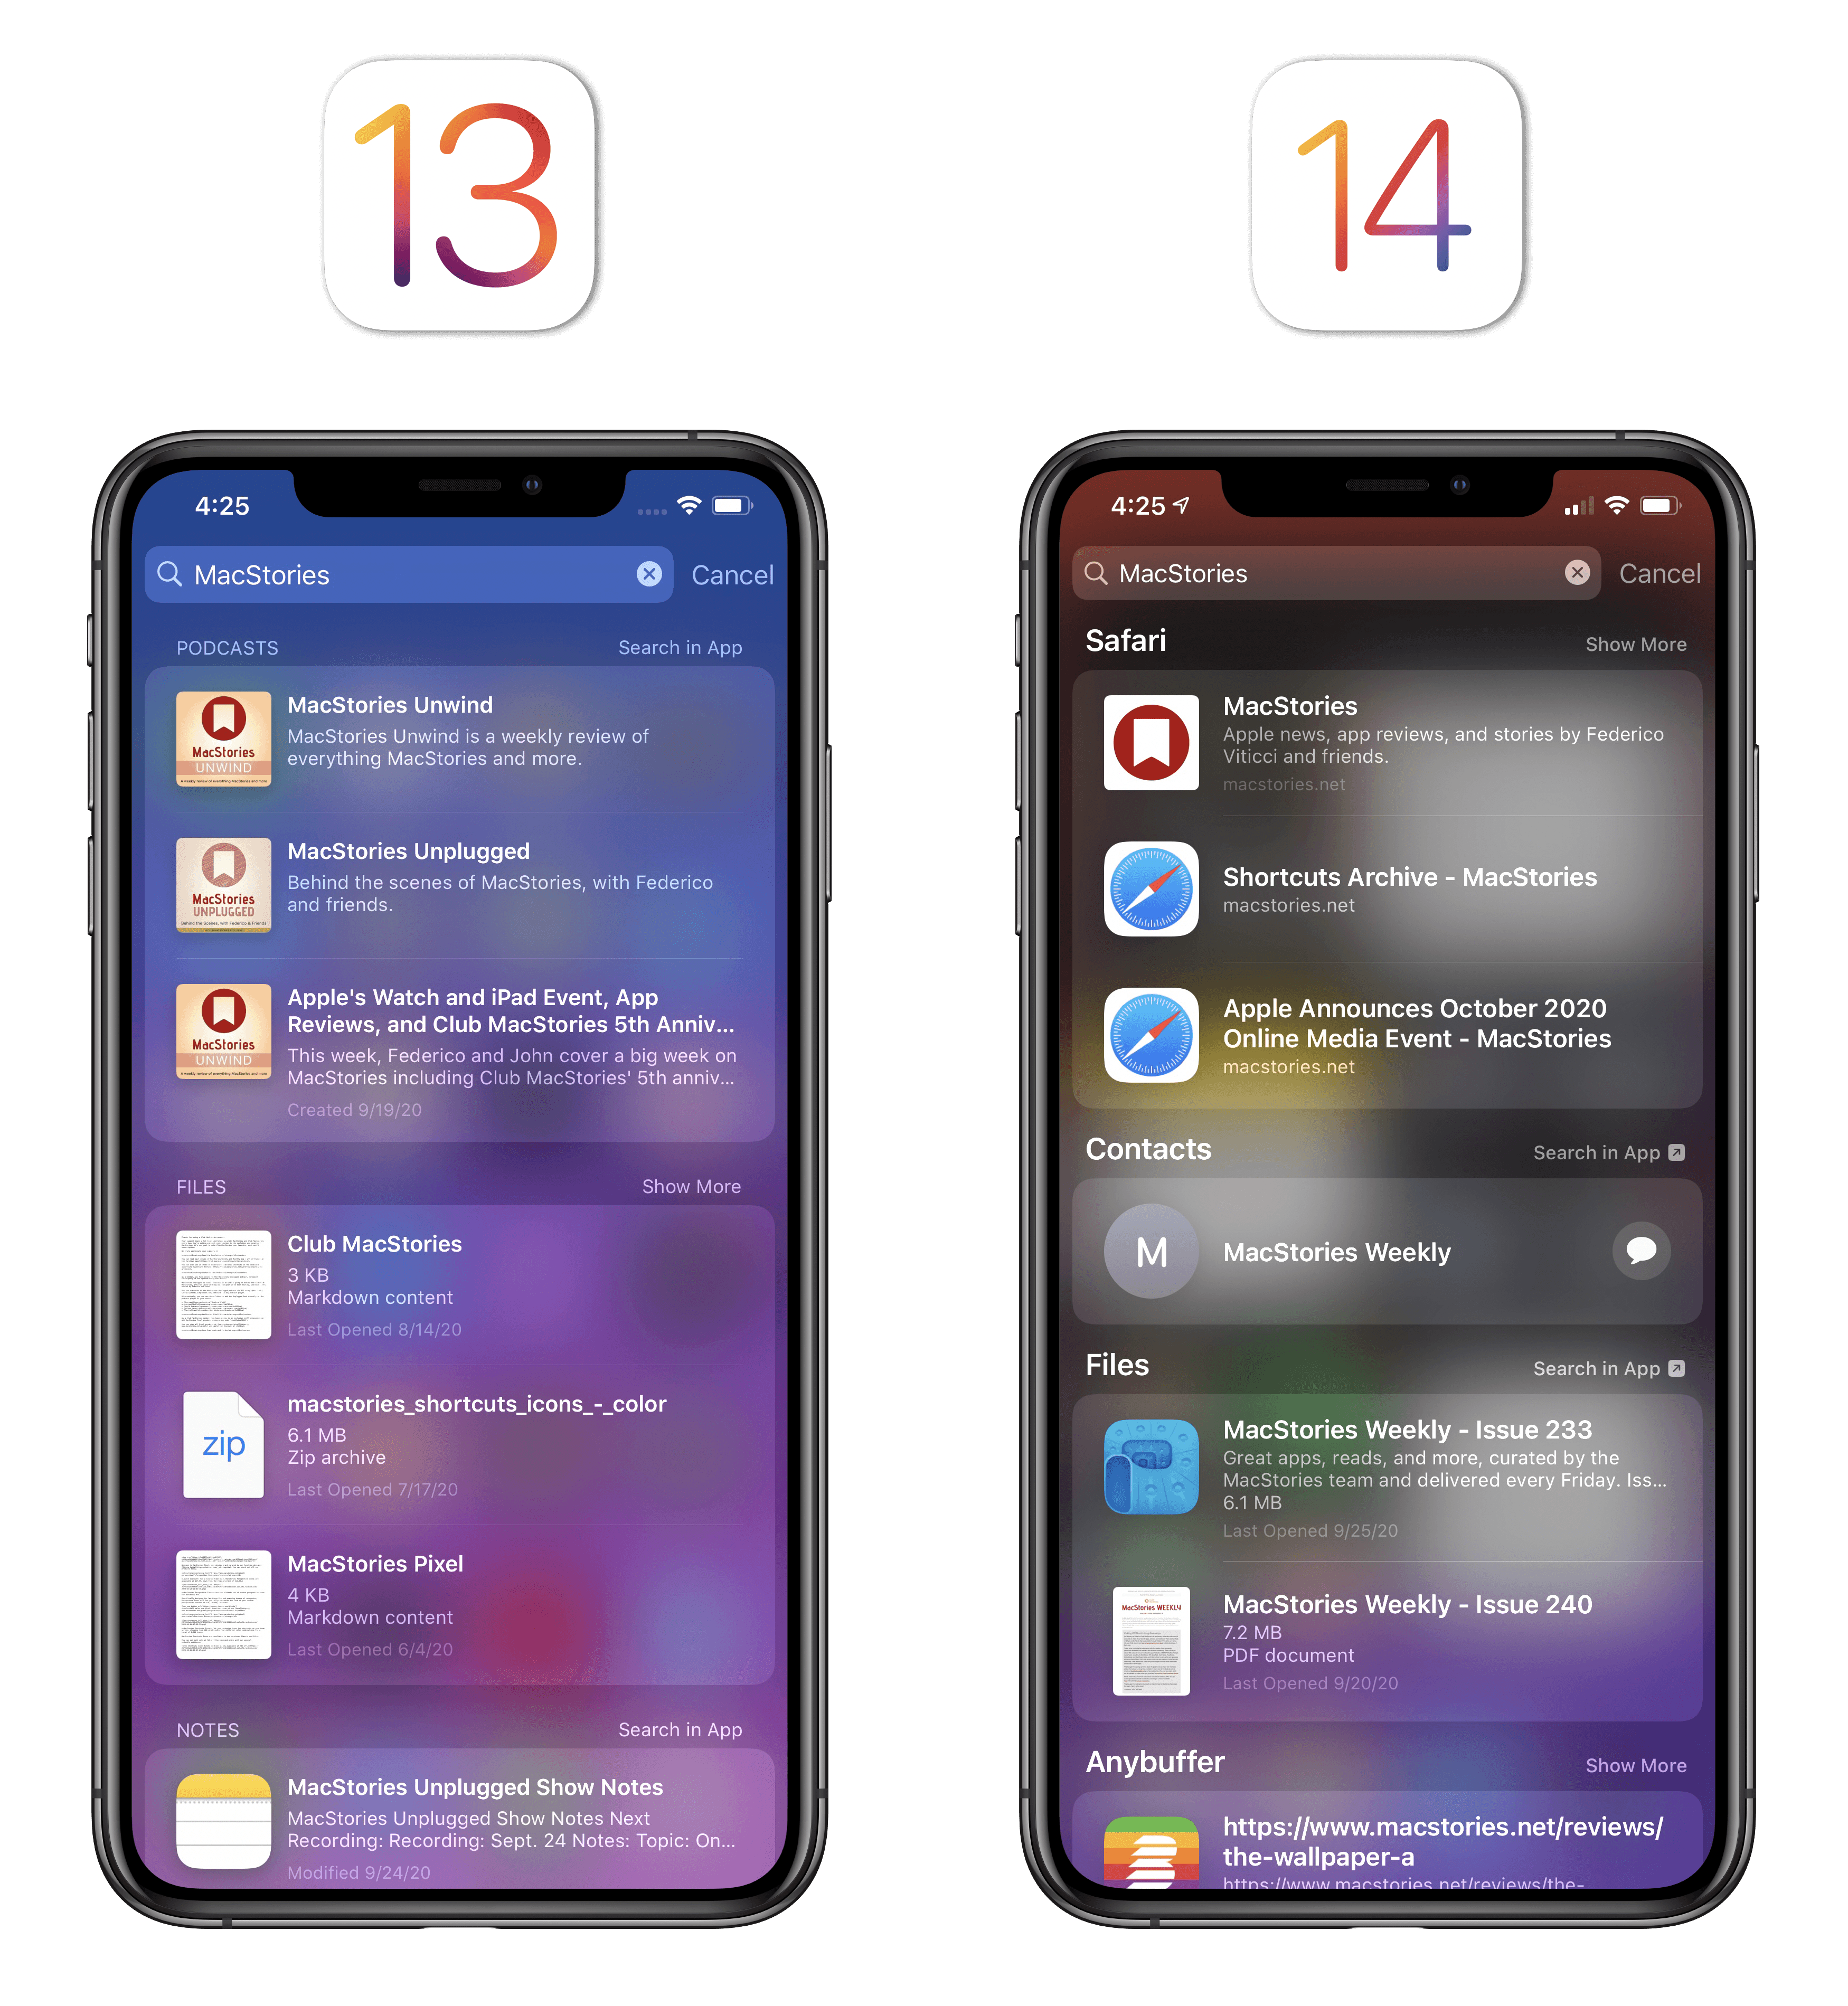 The refreshed look for Search in iOS 14.